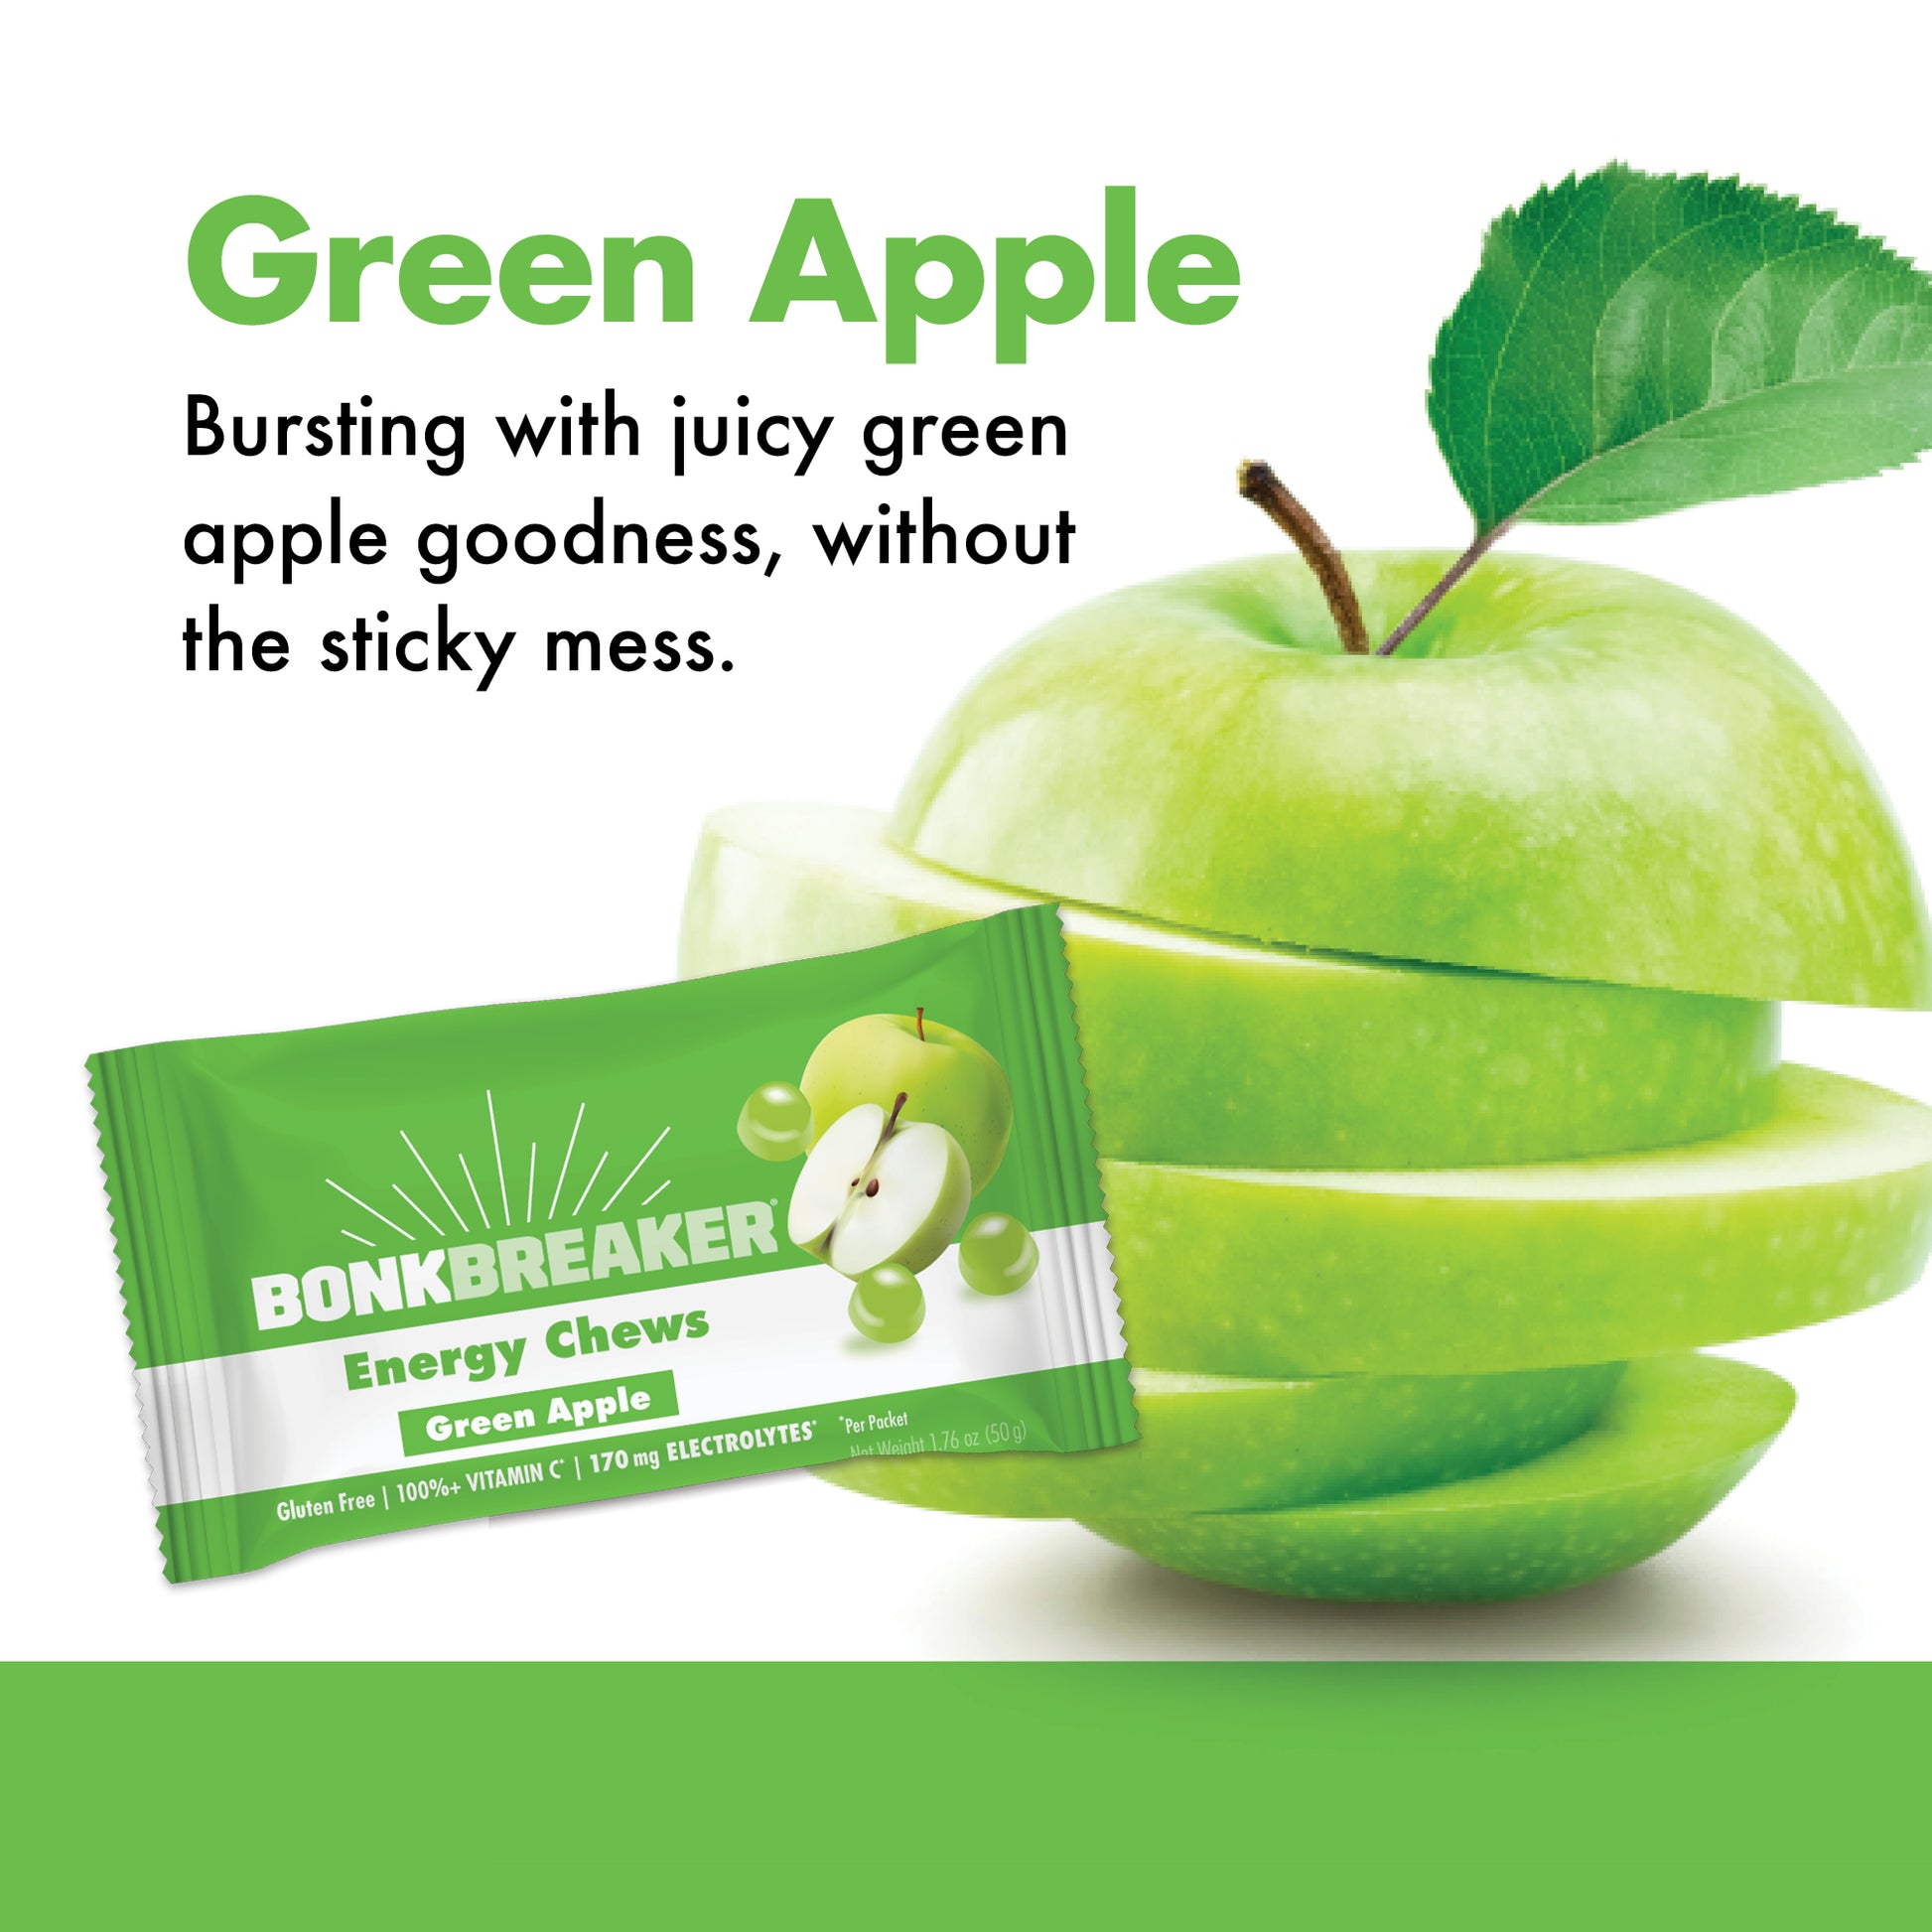 Green Apple - Bursting with juicy green apple goodness, without the sticky mess.